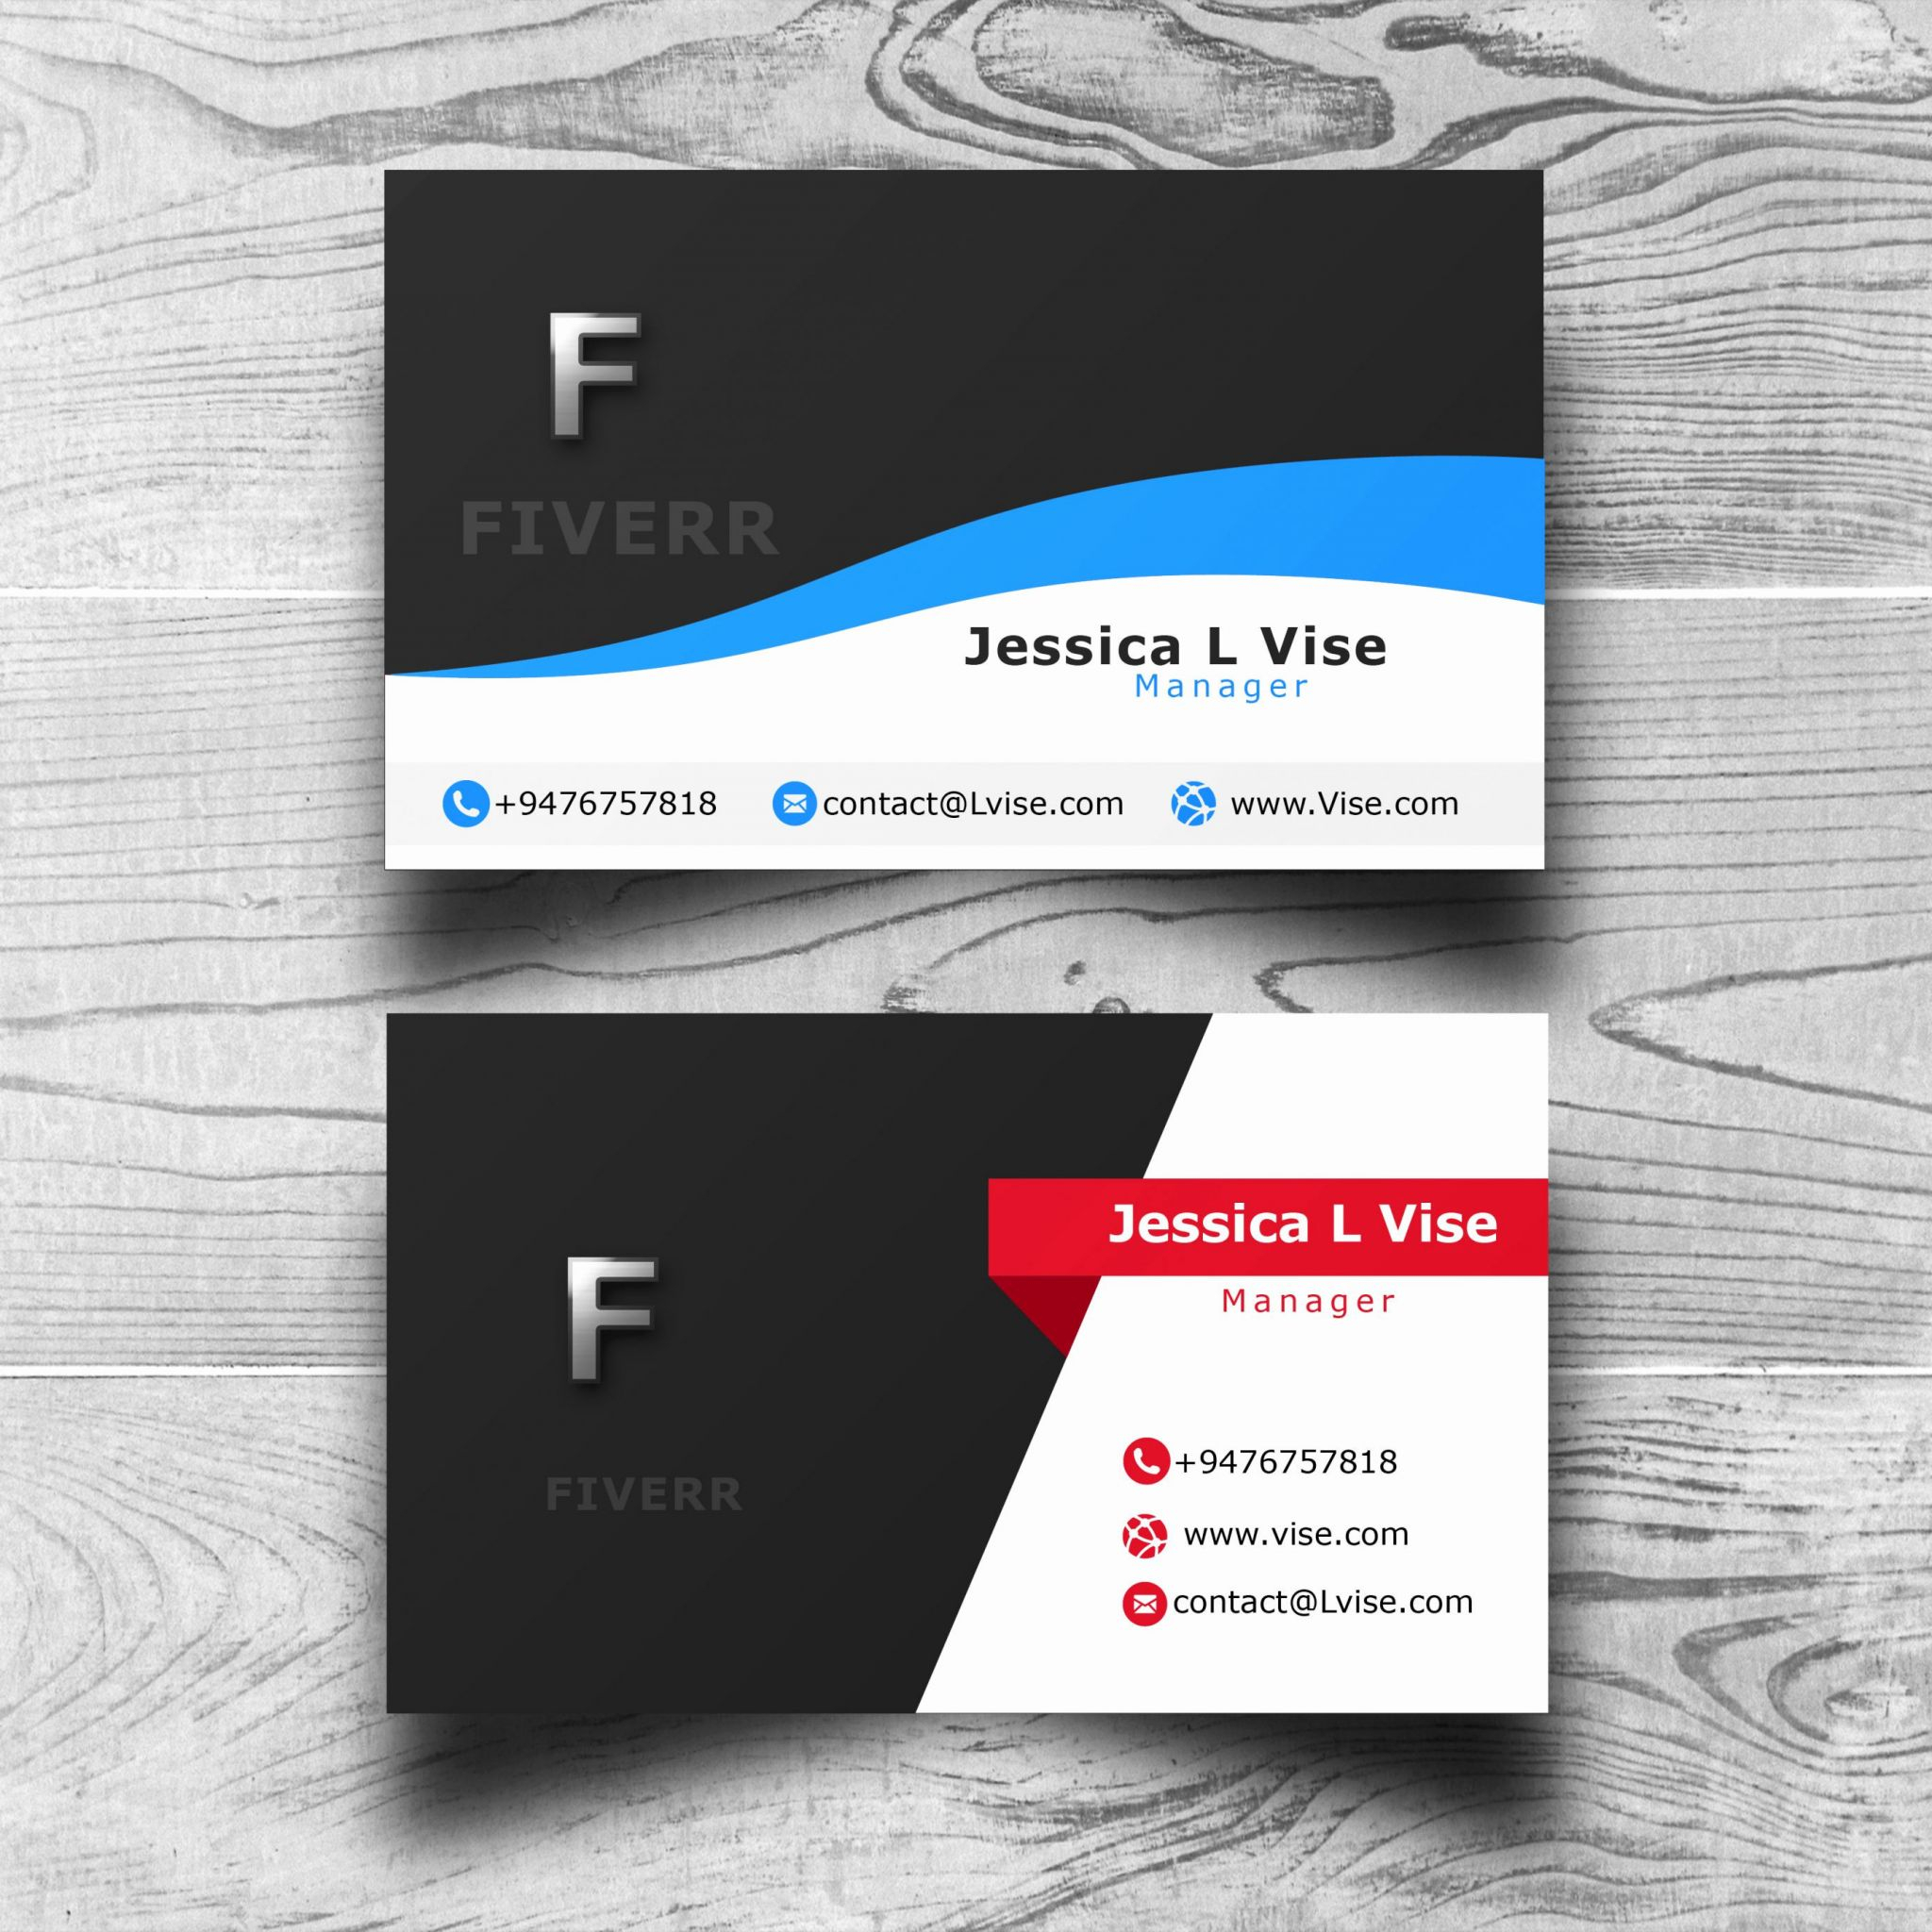 Double Sided Business Card Template Illustrator | Lera Mera With Regard To 2 Sided Business Card Template Word